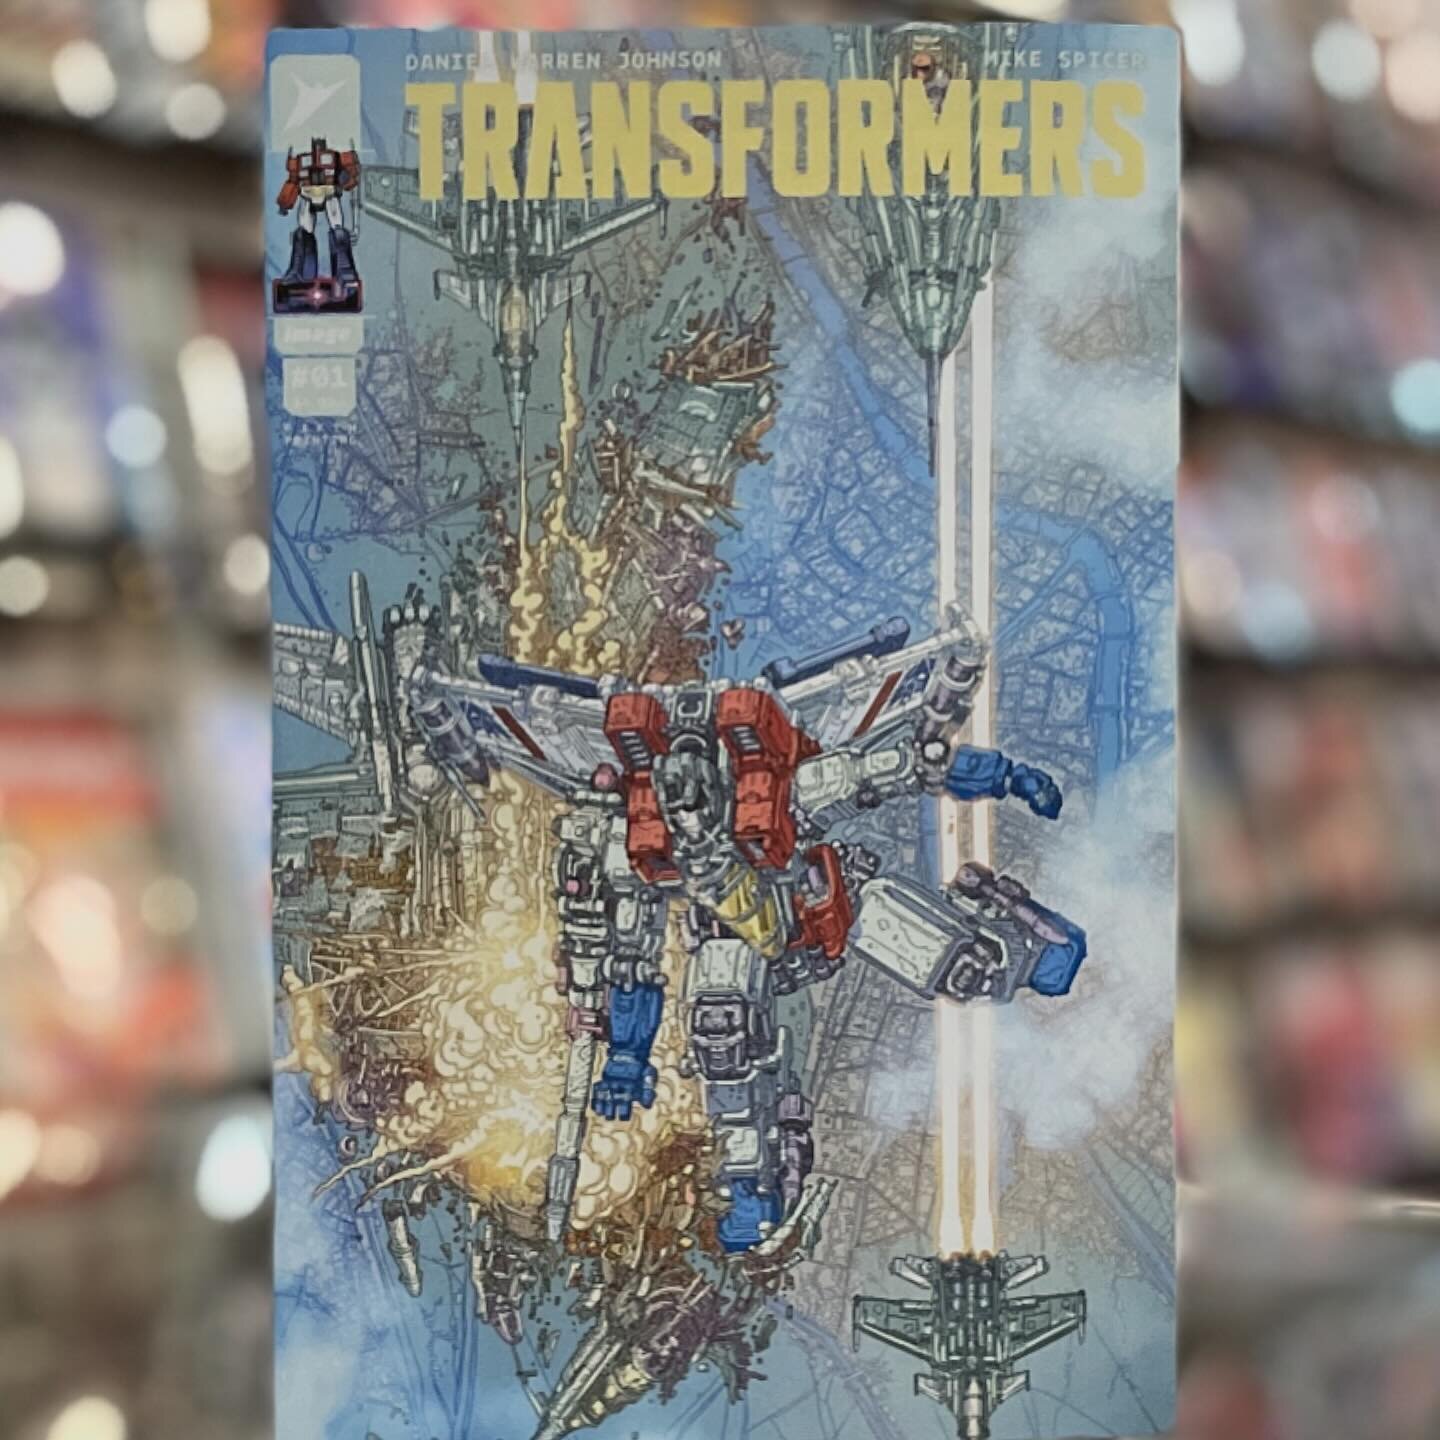 Happy New Comic Book Day!
📚
Optimus Prime was supposed to have led the Autobots to victory. Instead, the fate of Cybertron is unknown, and his allies have crash-landed far from home, alongside their enemies&mdash;the Decepticons. As these titanic fo